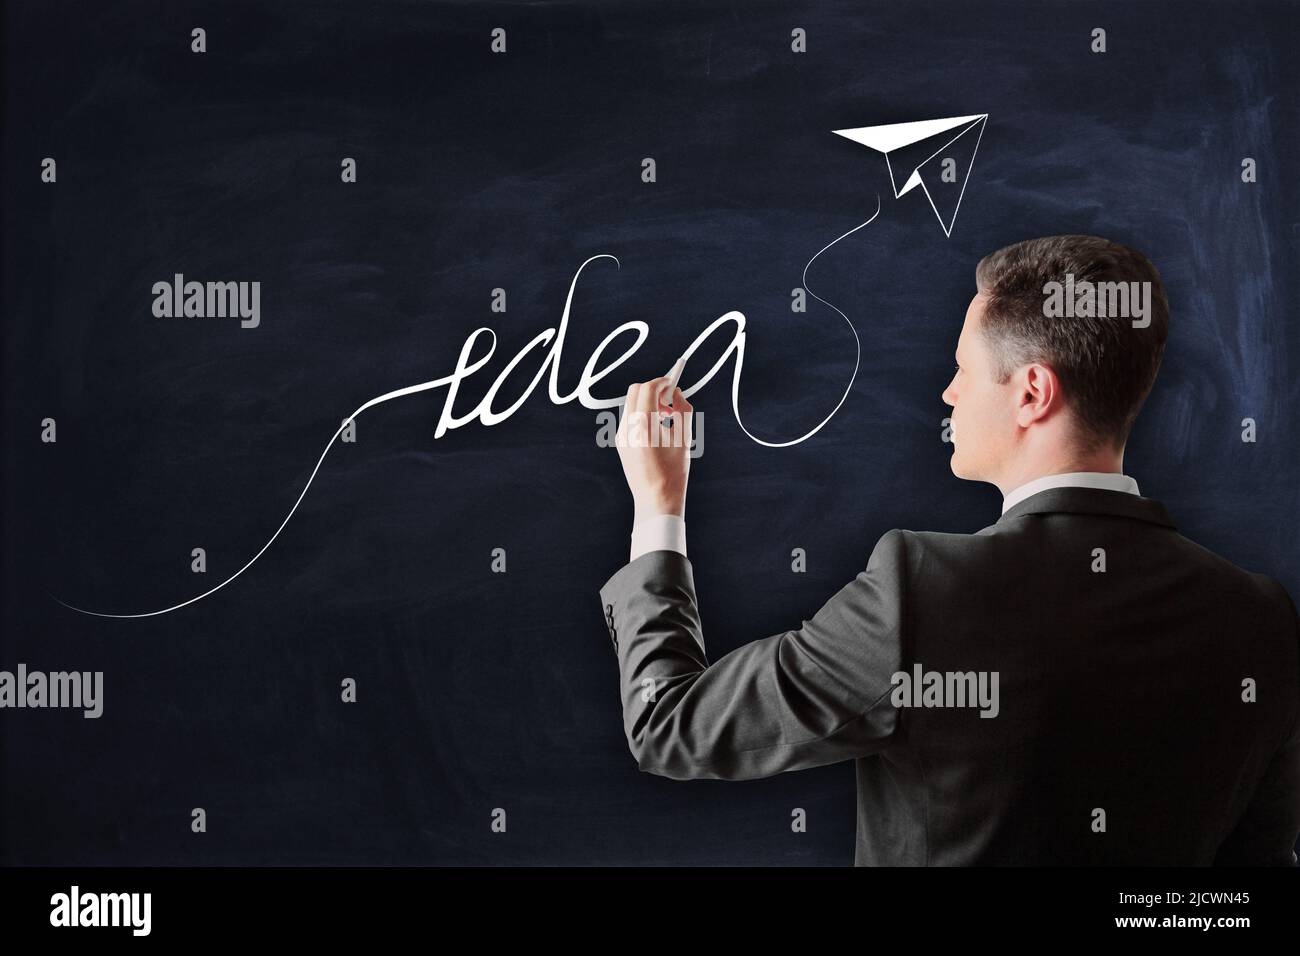 Idea, creativity and strategy concept with man in black suit writing by chalk idea word with paper plane on blackboard Stock Photo